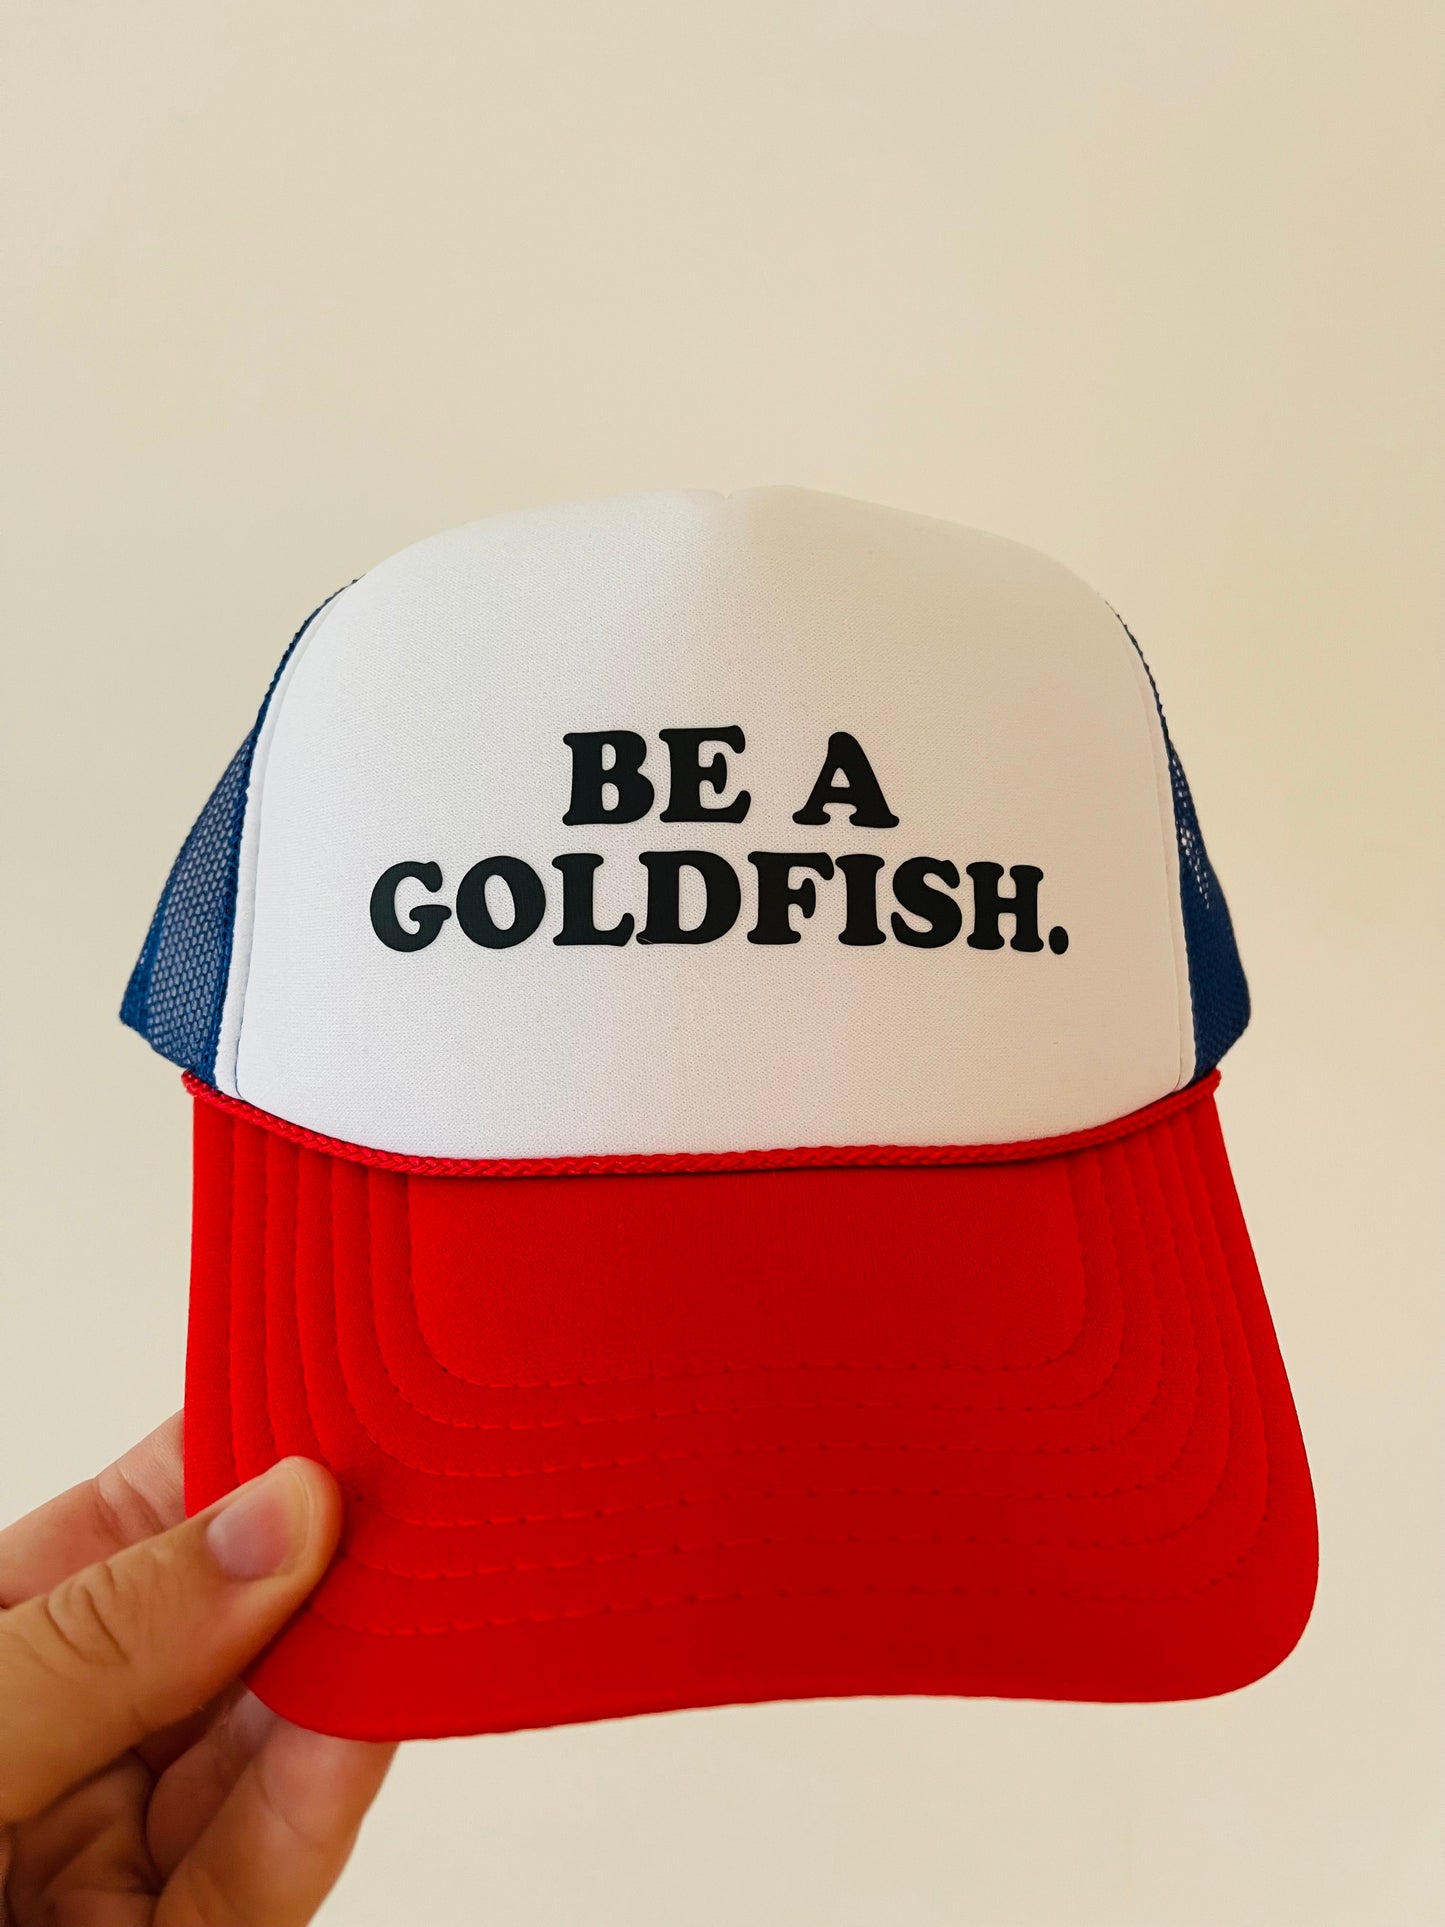 Be a goldfish. / Ted Lasso